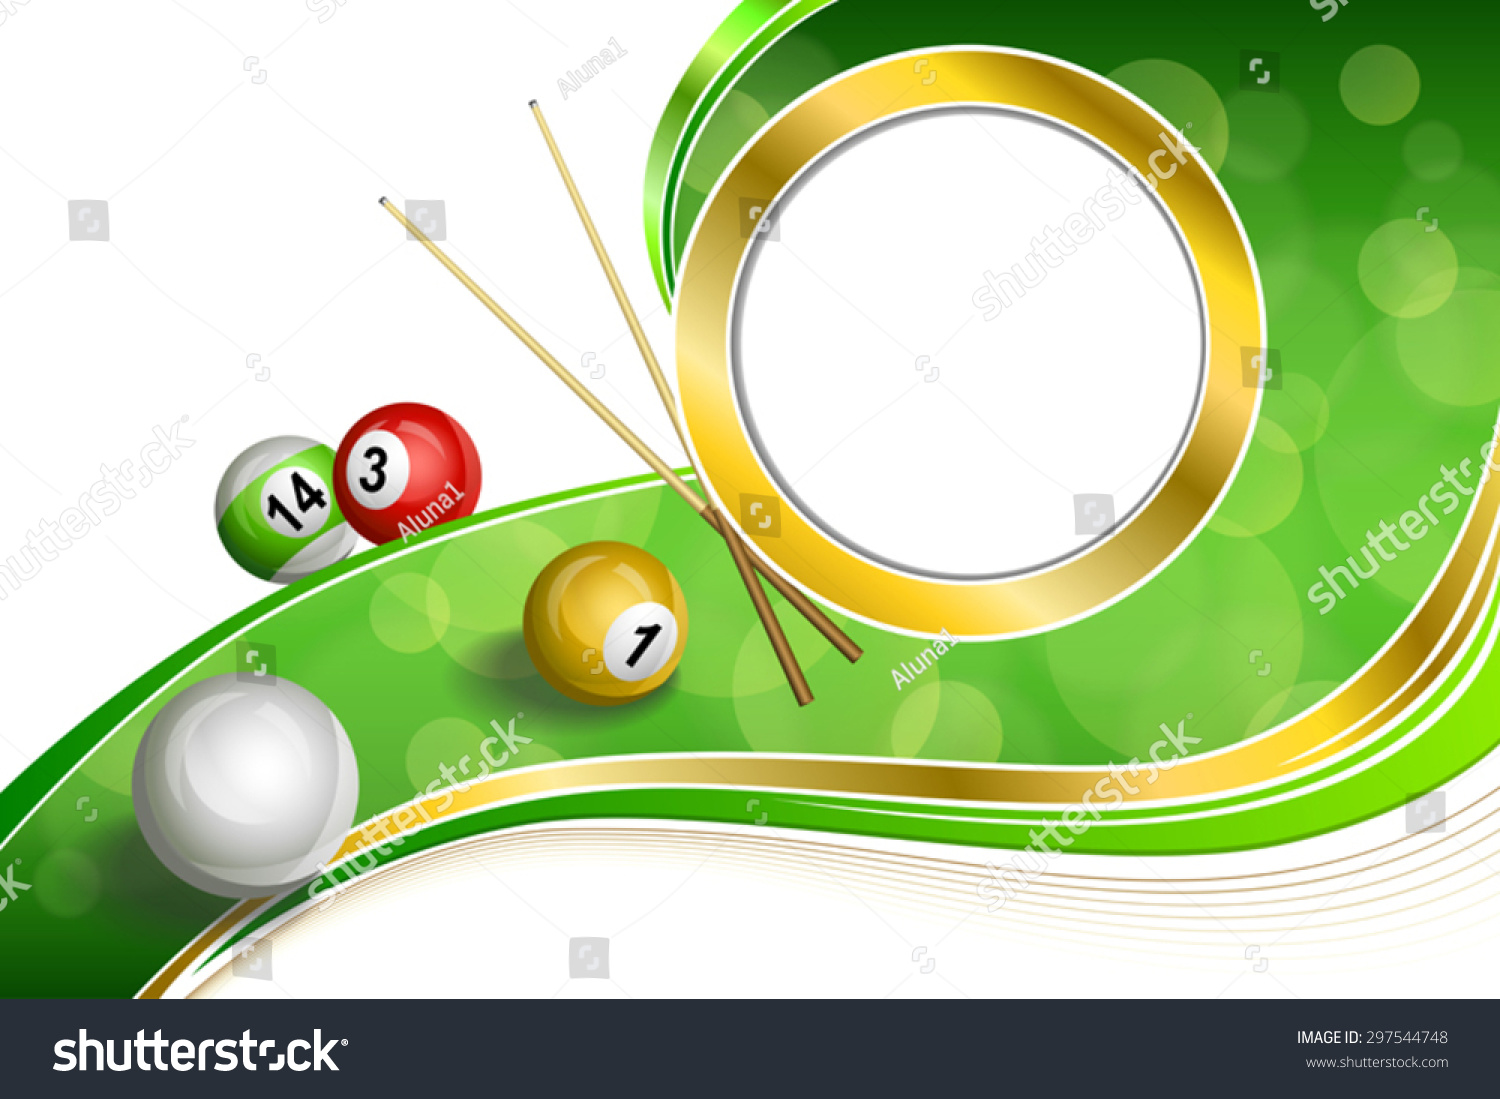 Background Abstract Green Billiards Pool Cue Stock Vector 297544748 ...